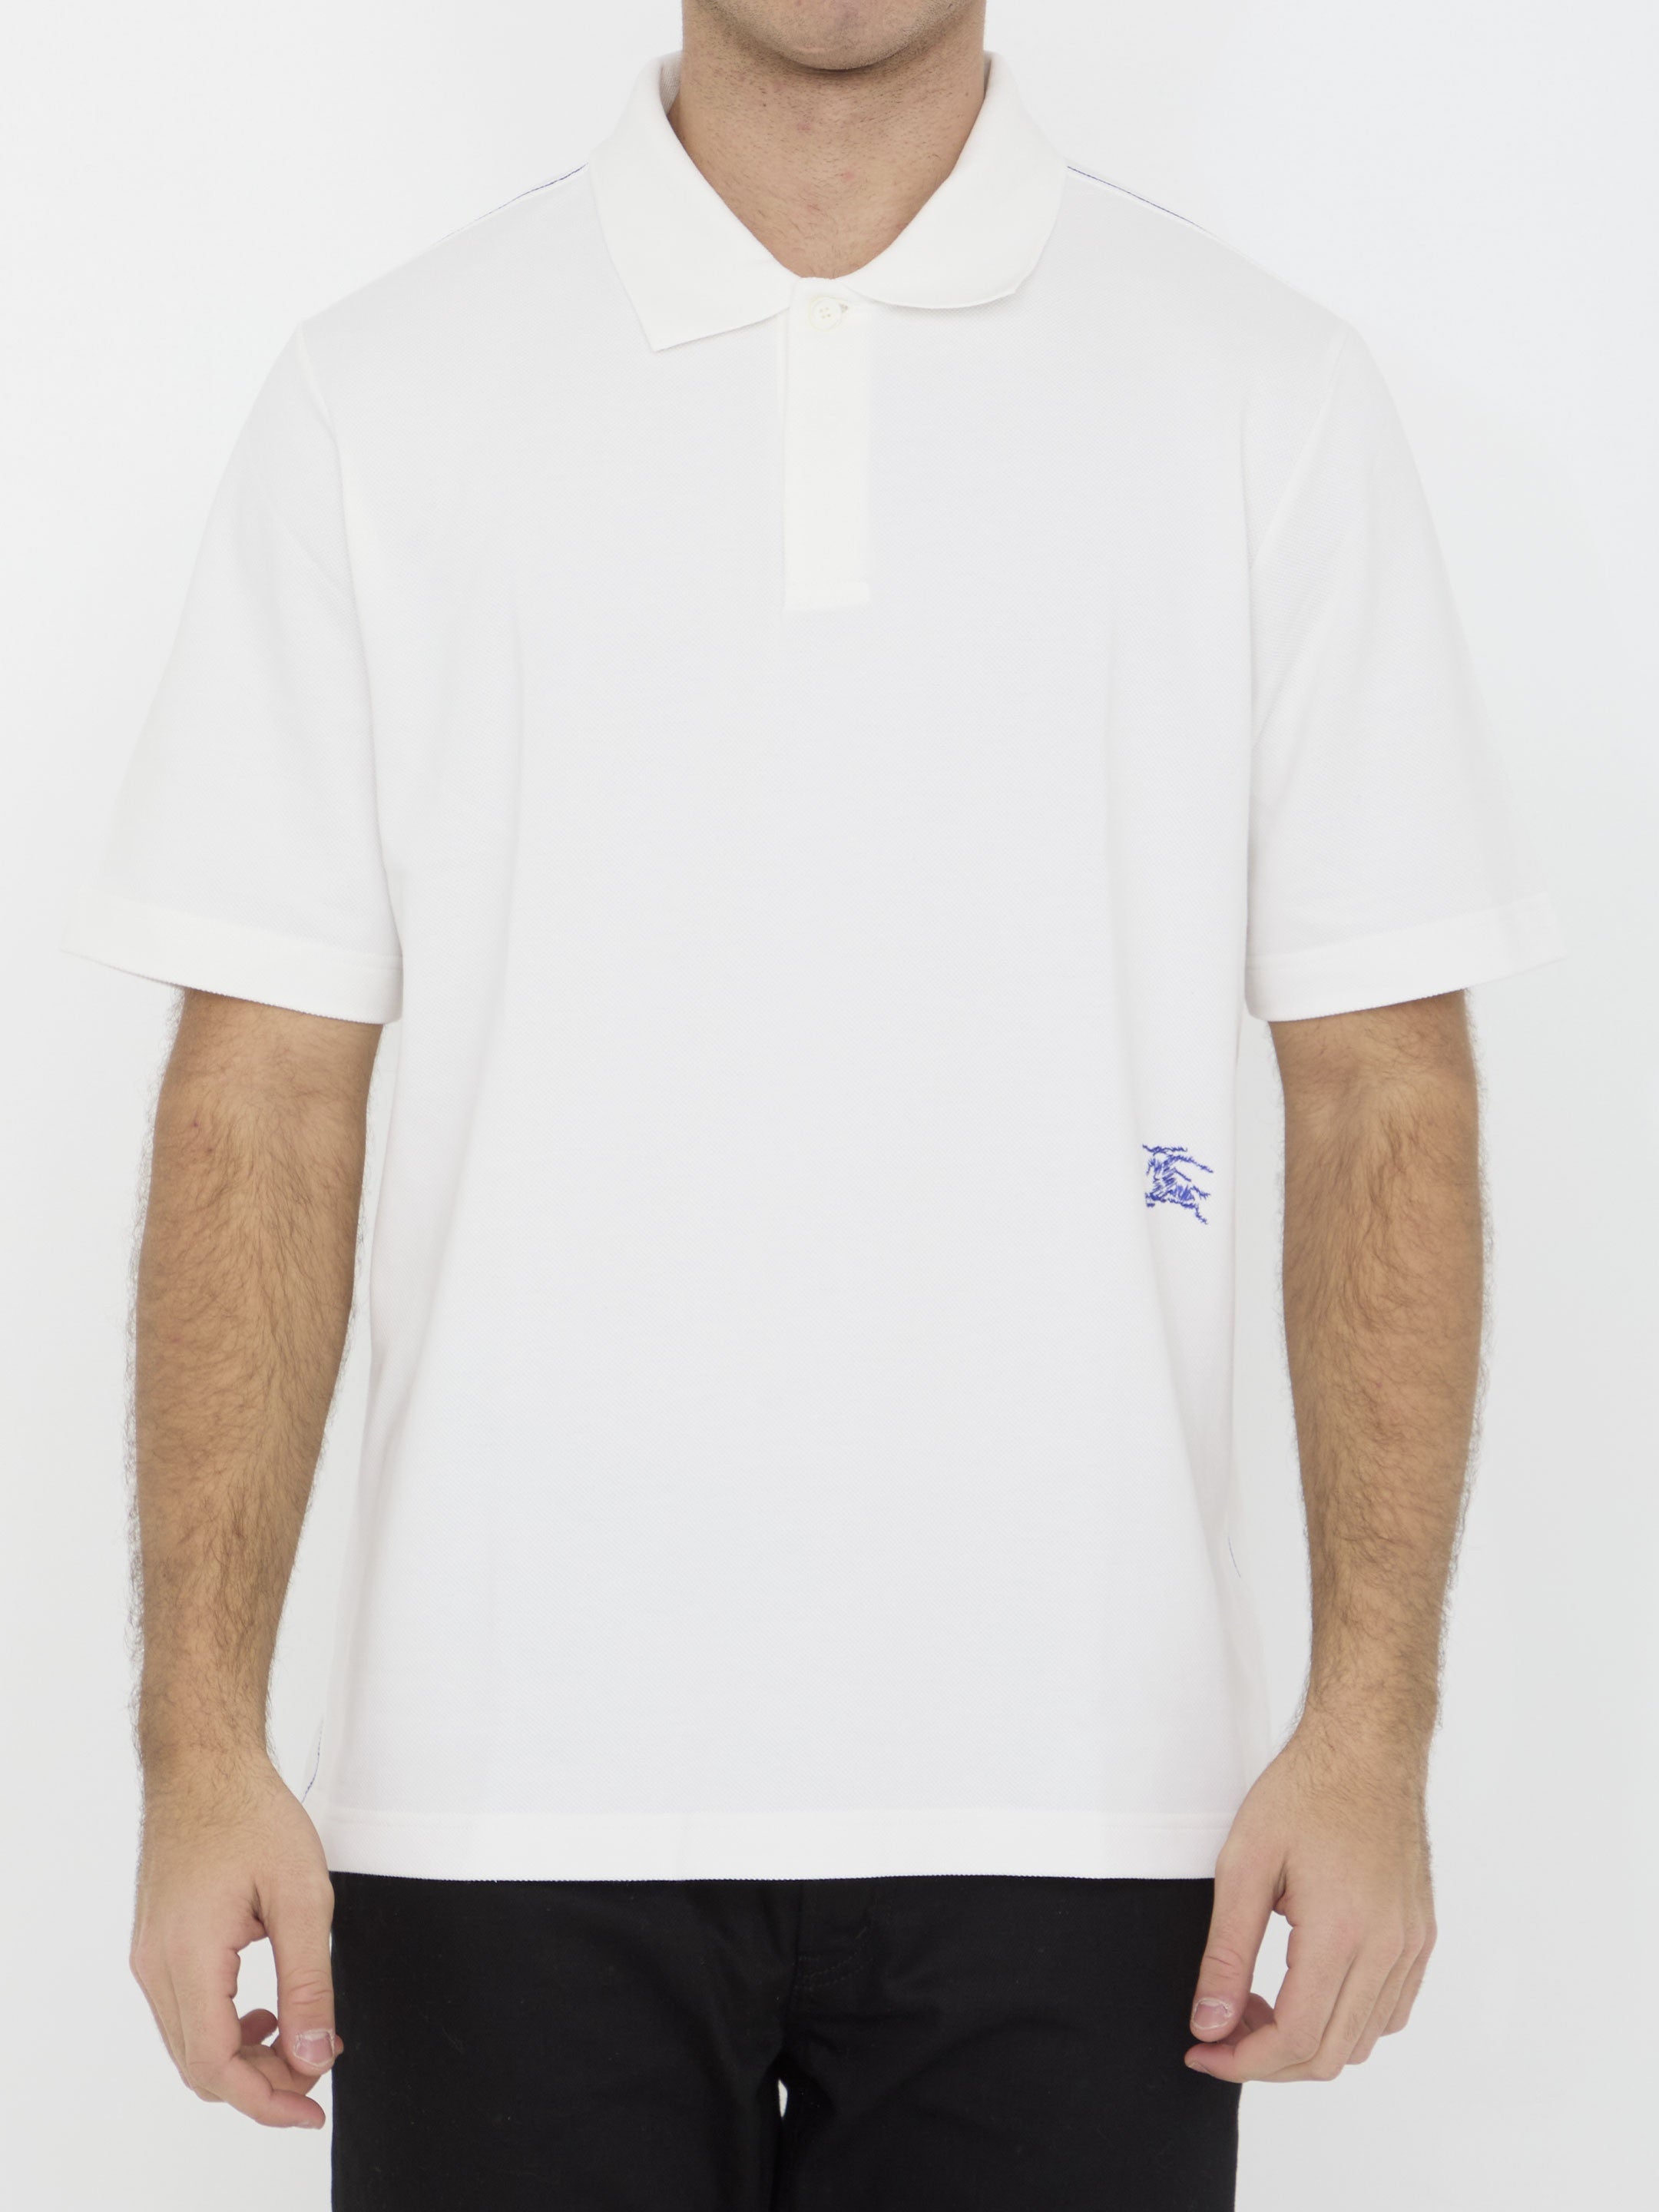 BURBERRY-OUTLET-SALE-Cotton-polo-shirt-Shirts-L-WHITE-ARCHIVE-COLLECTION.jpg